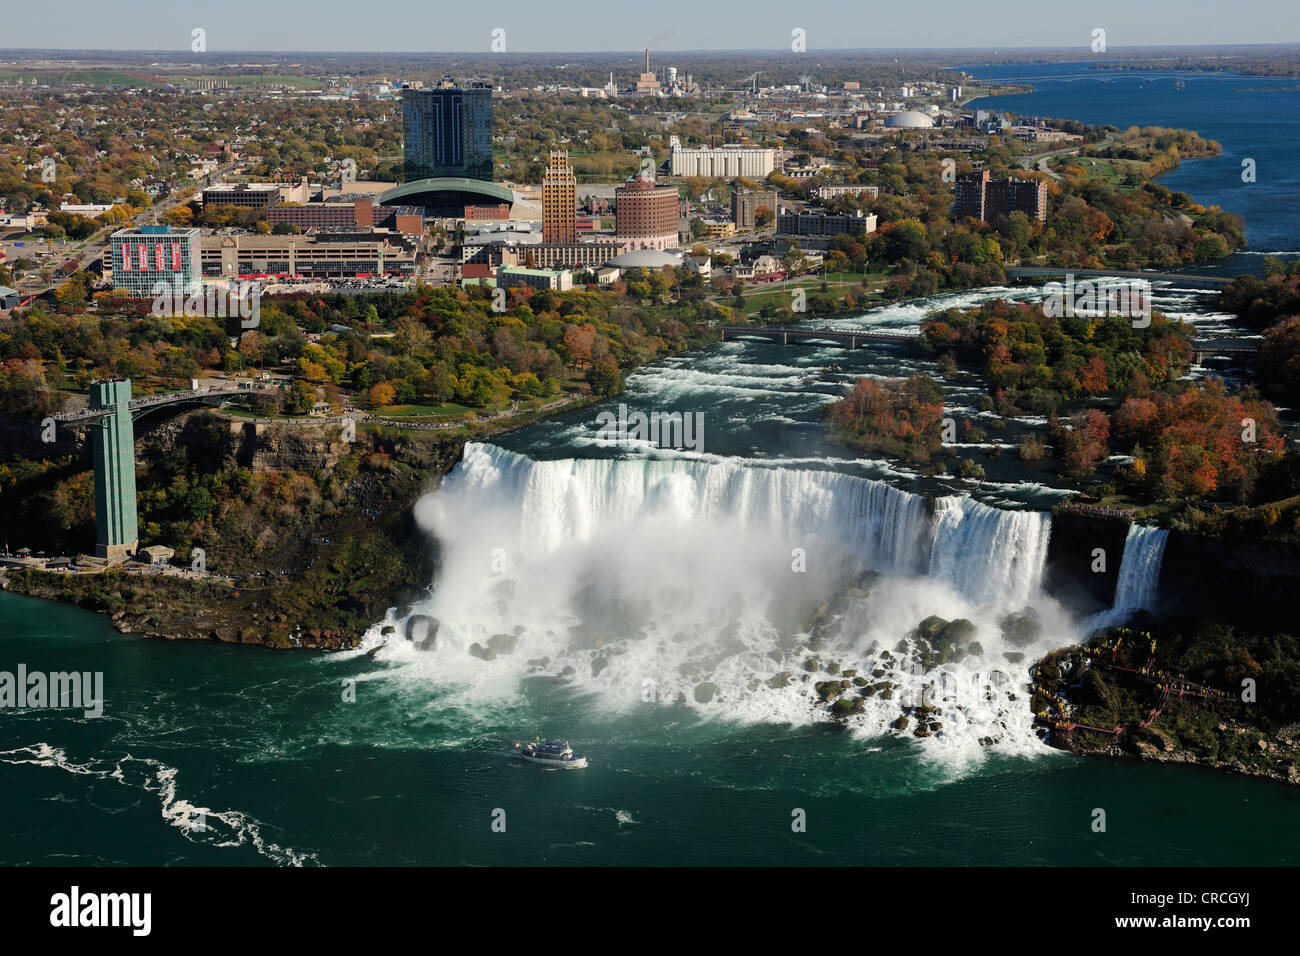 The Niagara Falls, view from above from a lookout tower, Niagara Falls, Ontario, Canada, North America Stock Photo